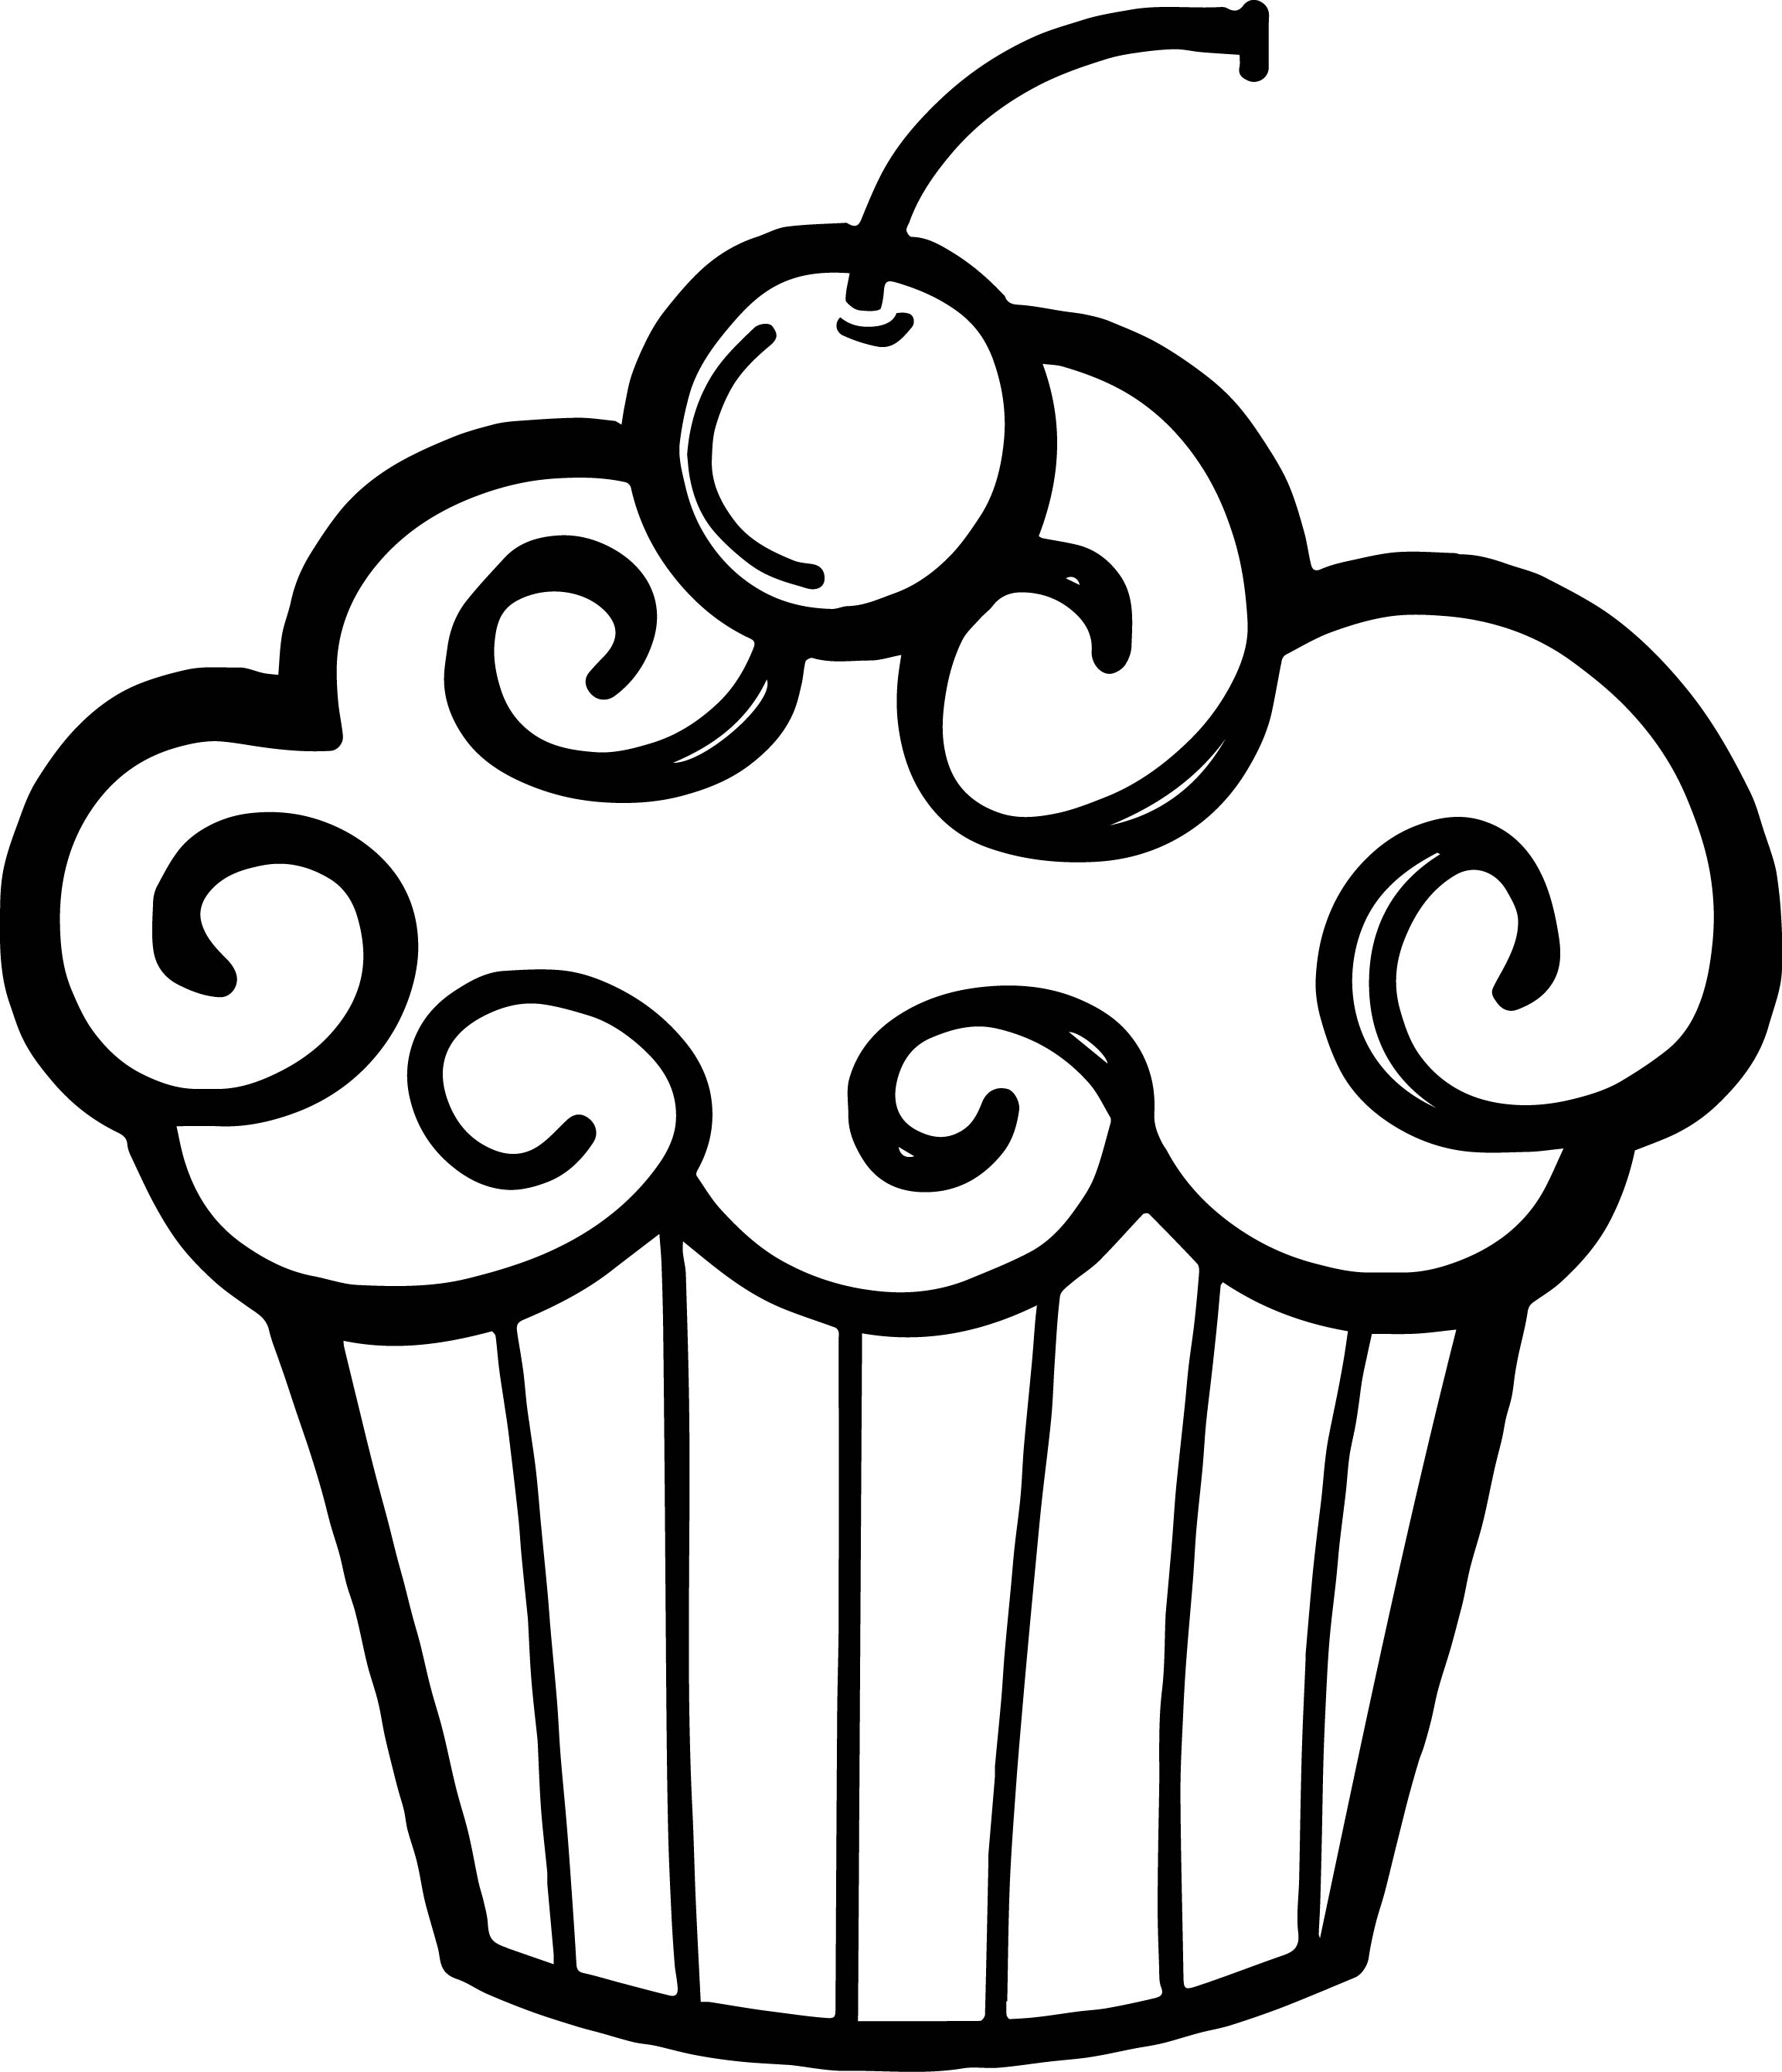 Black amp White clipart cupcake Pencil and in color black amp white 